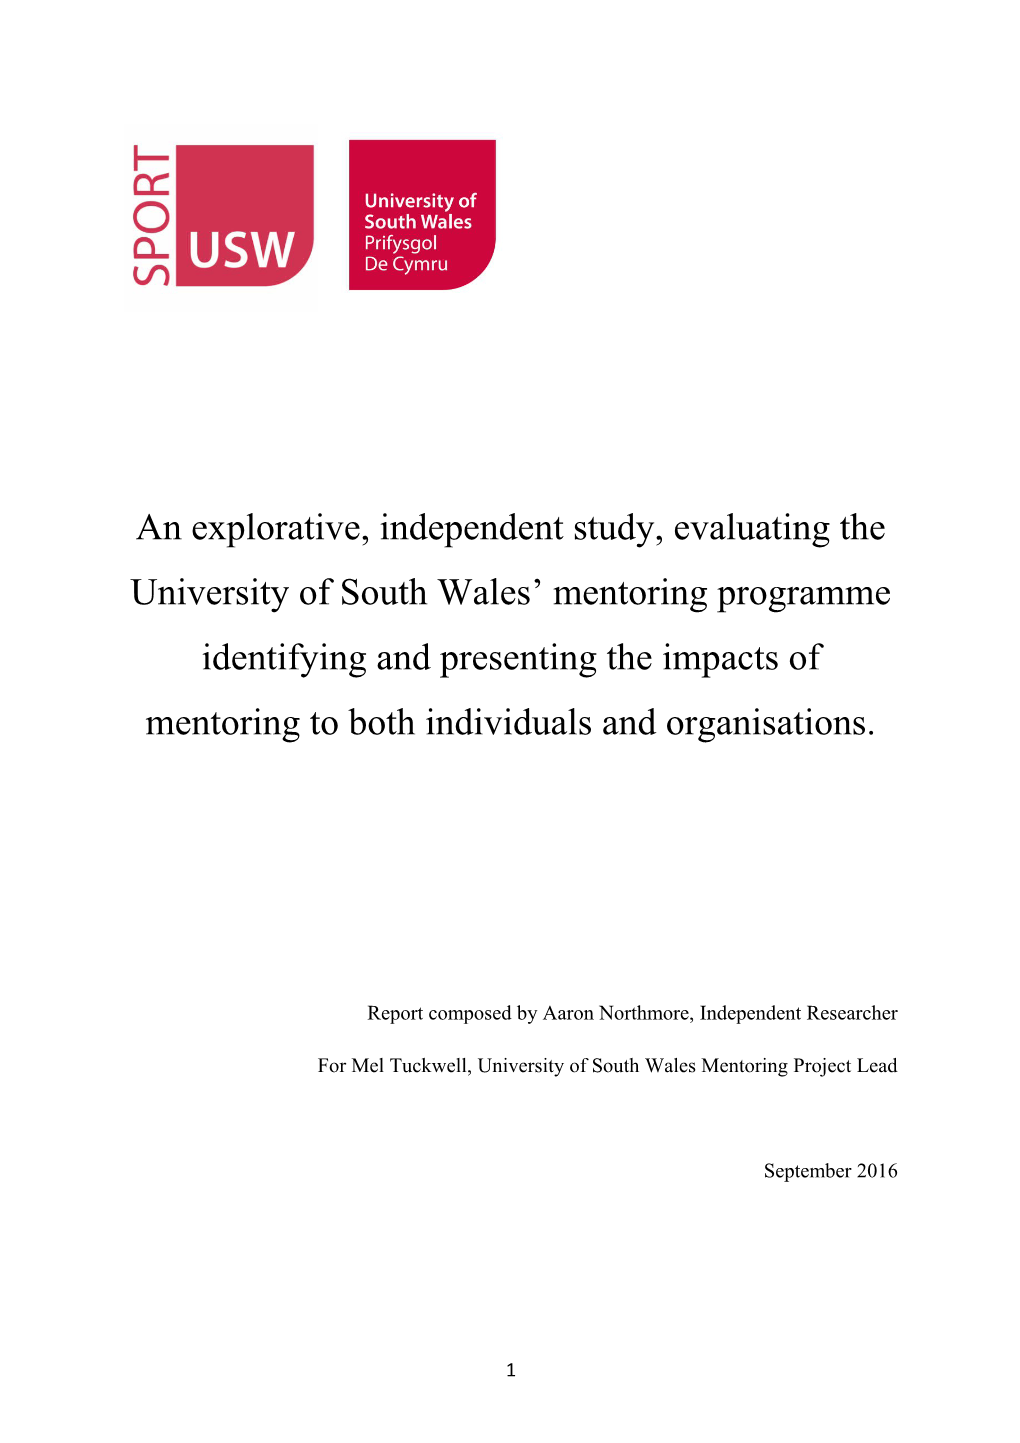 Report Composed by Aaron Northmore, Independent Researcher